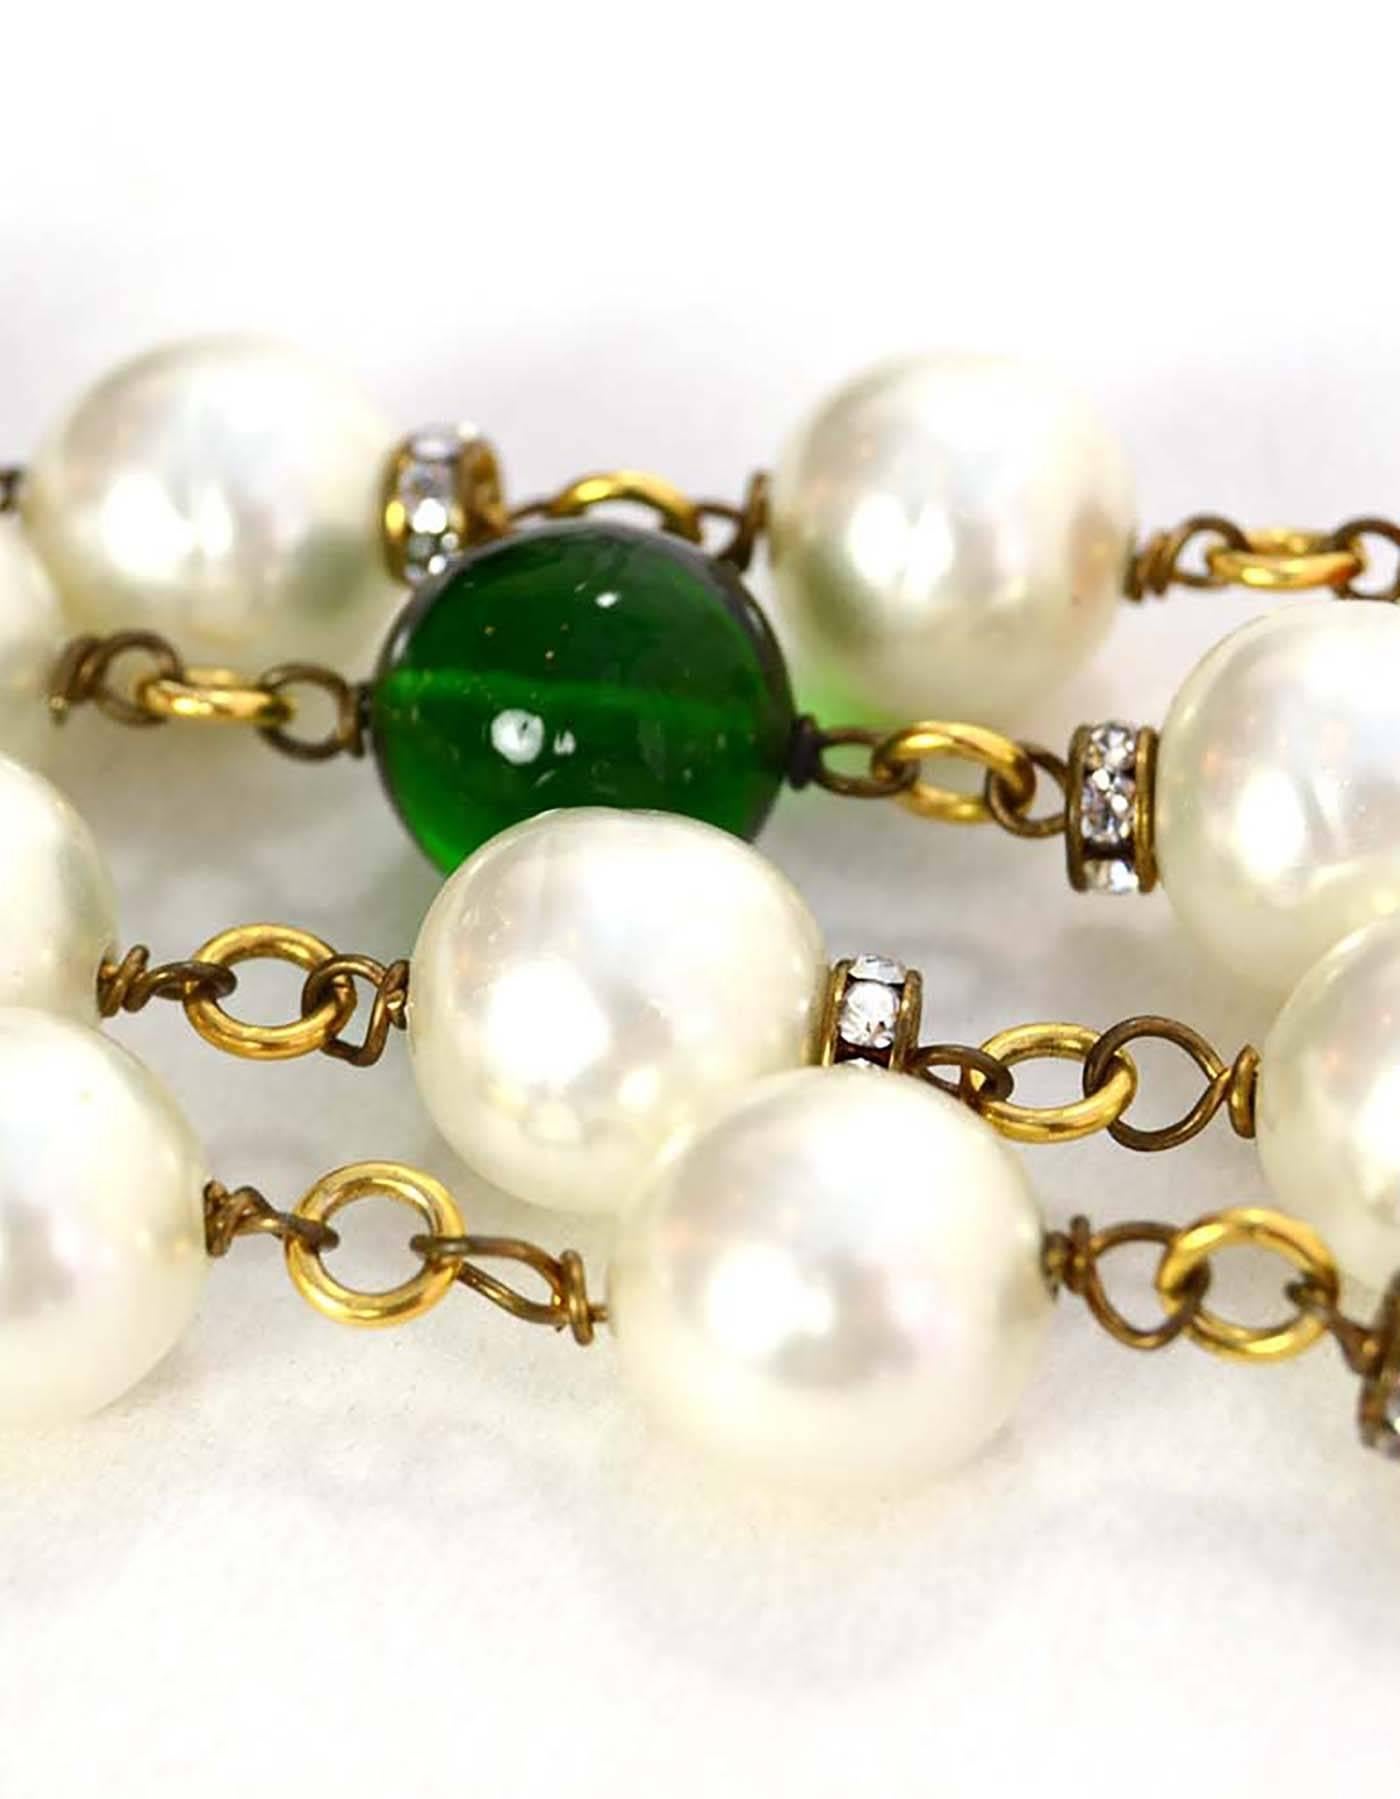 Chanel Vintage '90s Pearl and Glass Bead Double Strand Necklace
Features red, orange and green glass beads as well as rhinestones throughout
Made in: France
Year of Production: 1990's
Stamp: Chanel CC Made in France
Closure: Hook and eye